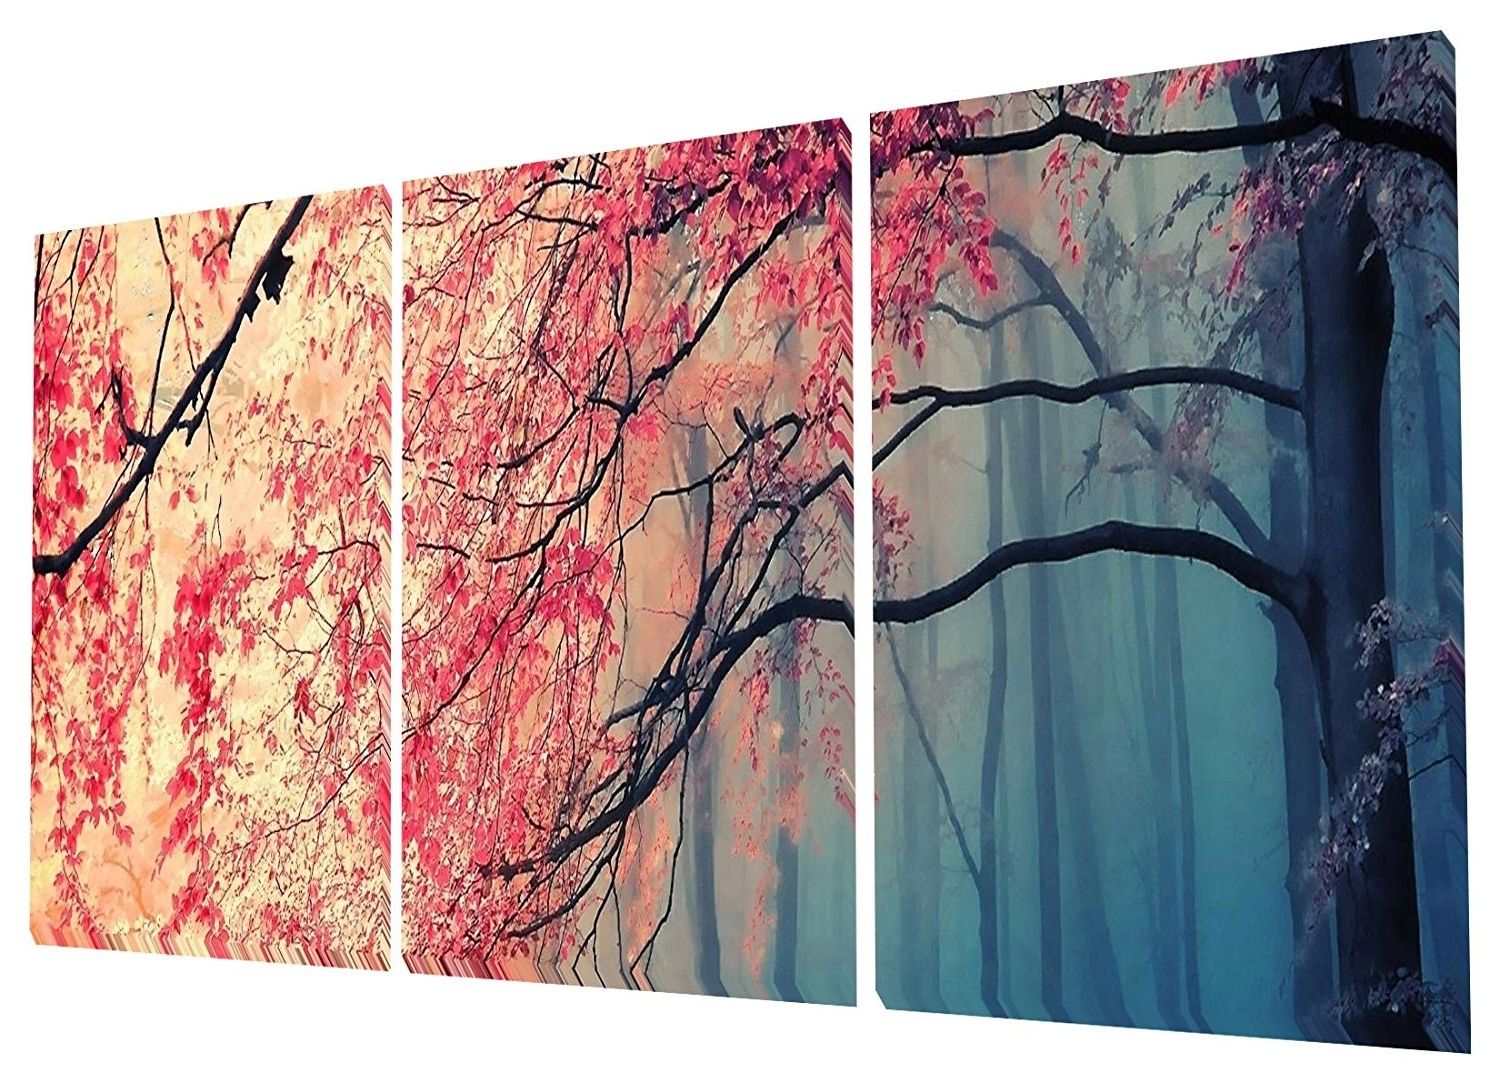 Amazon: Gardenia Art – Red Maples Canvas Prints Wall Art With Regard To Well Liked Pink And Grey Wall Art (View 15 of 15)